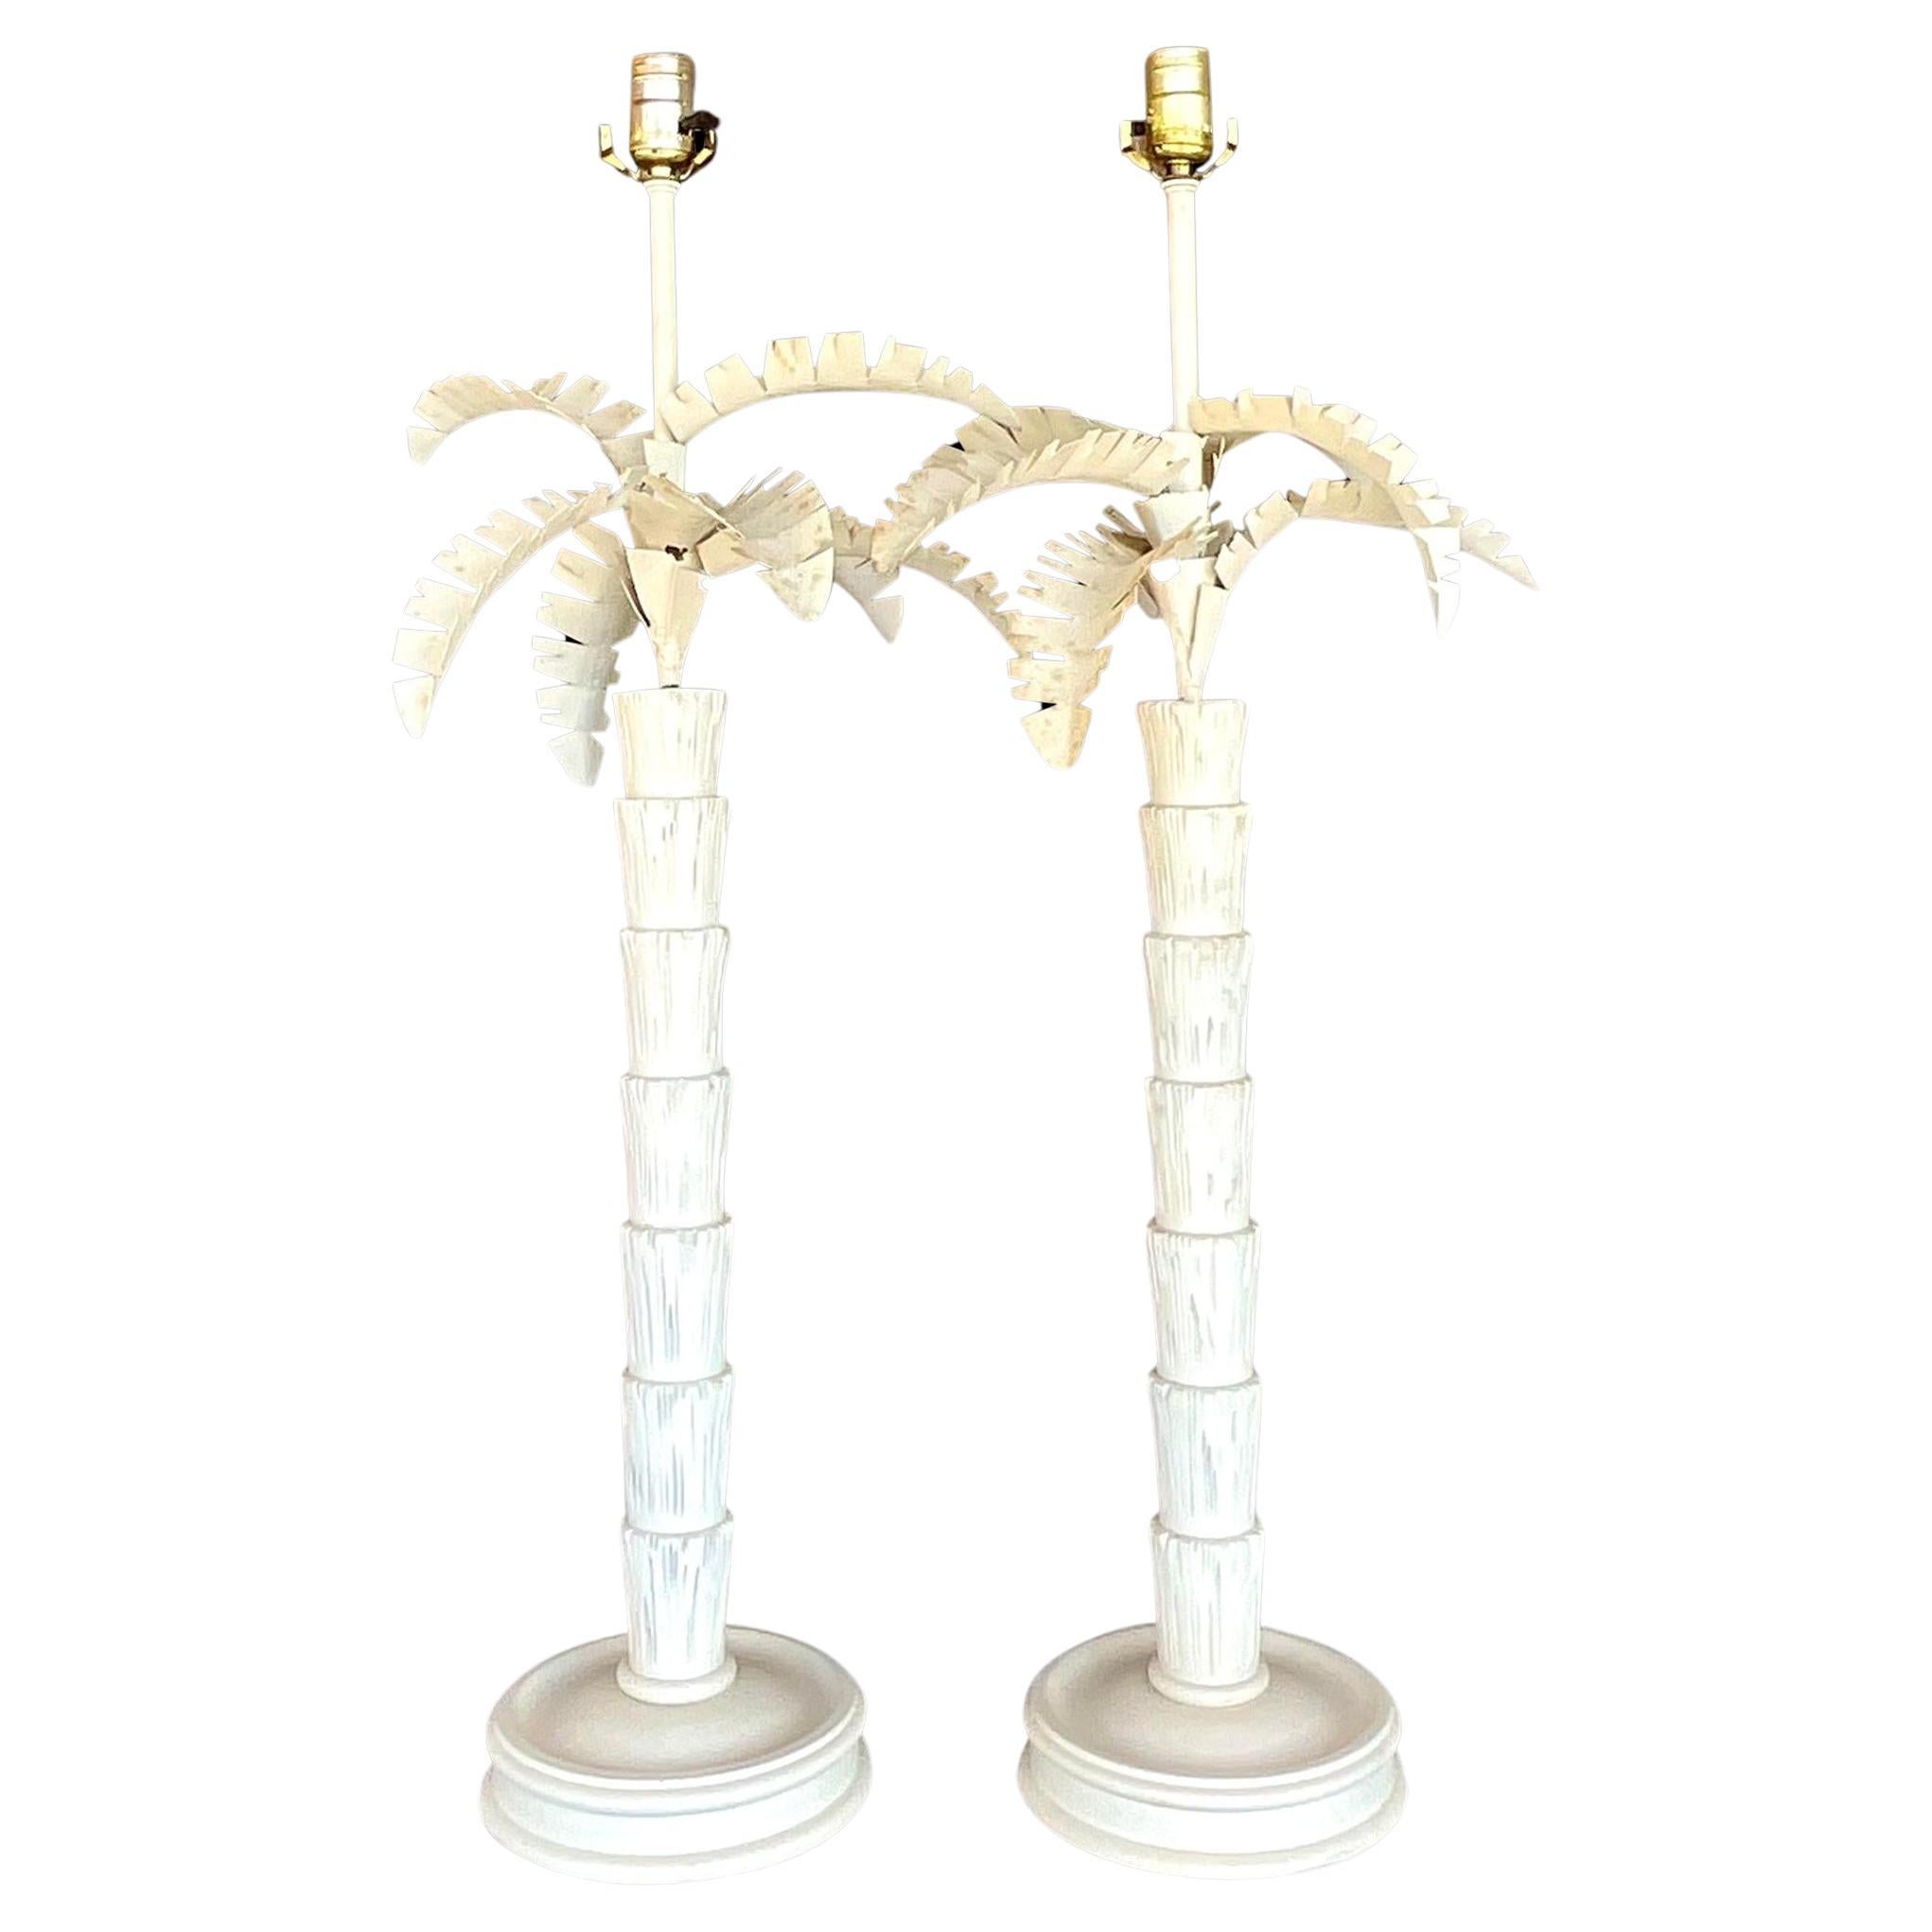 Vintage Costal Punch Cut Metal Palm Tree Lamps - a Pair